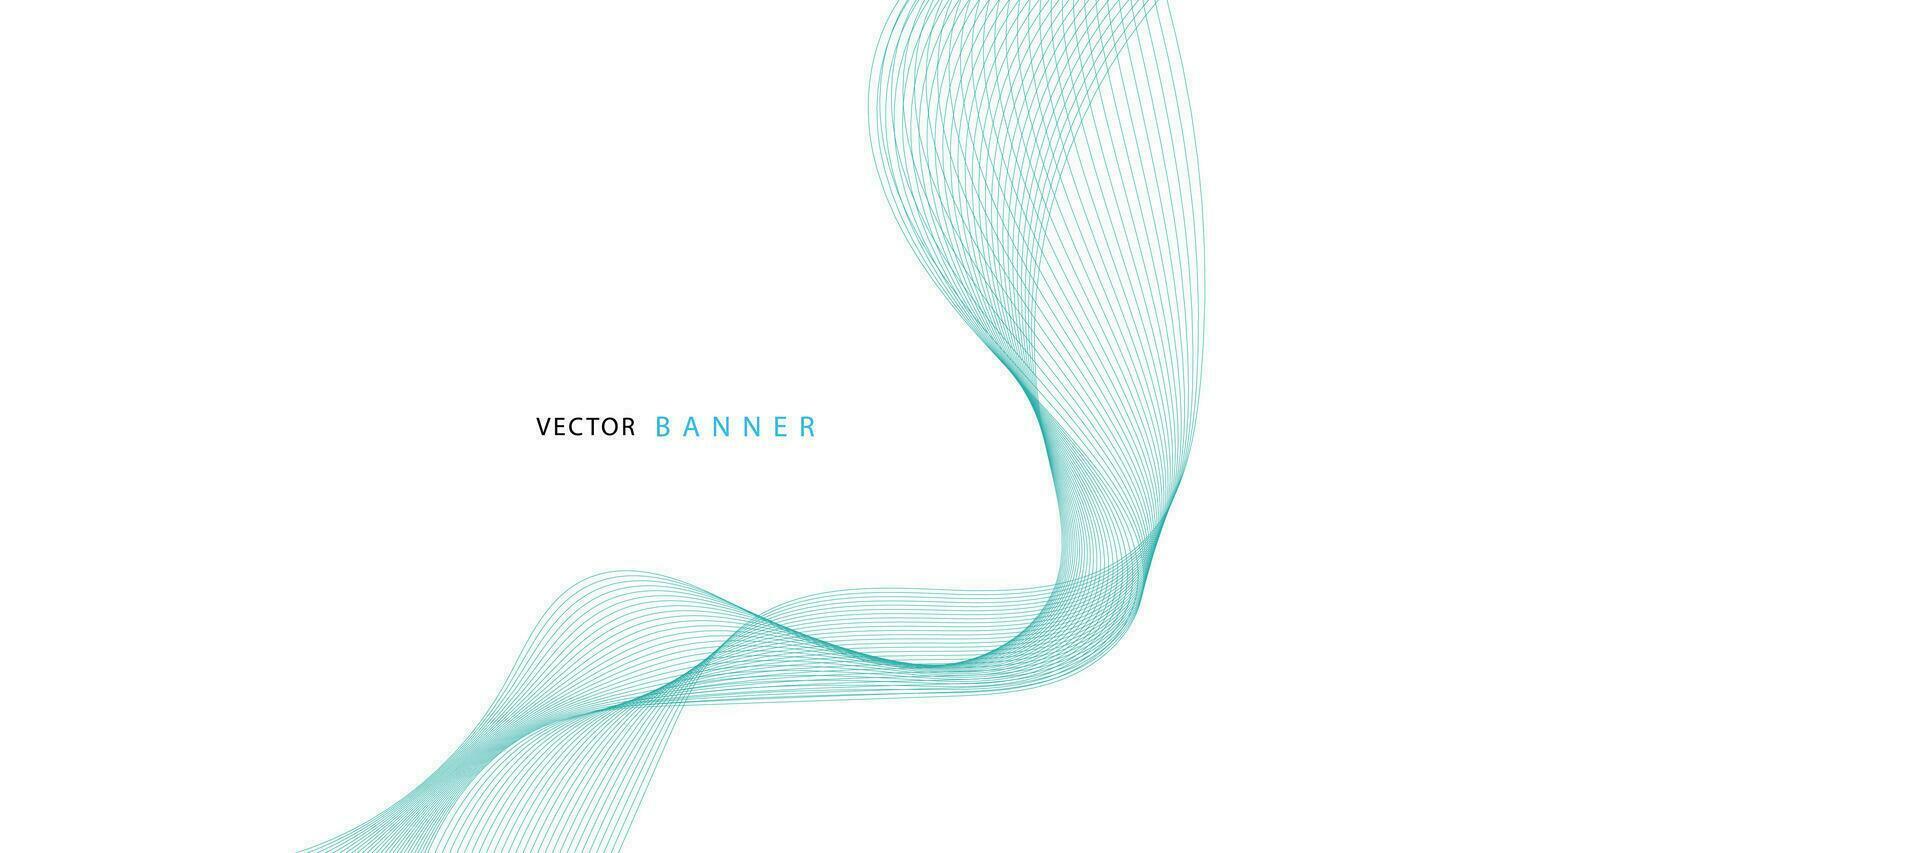 Abstract illustration of vector banner. Modern vector banner template with blue wavy lines.